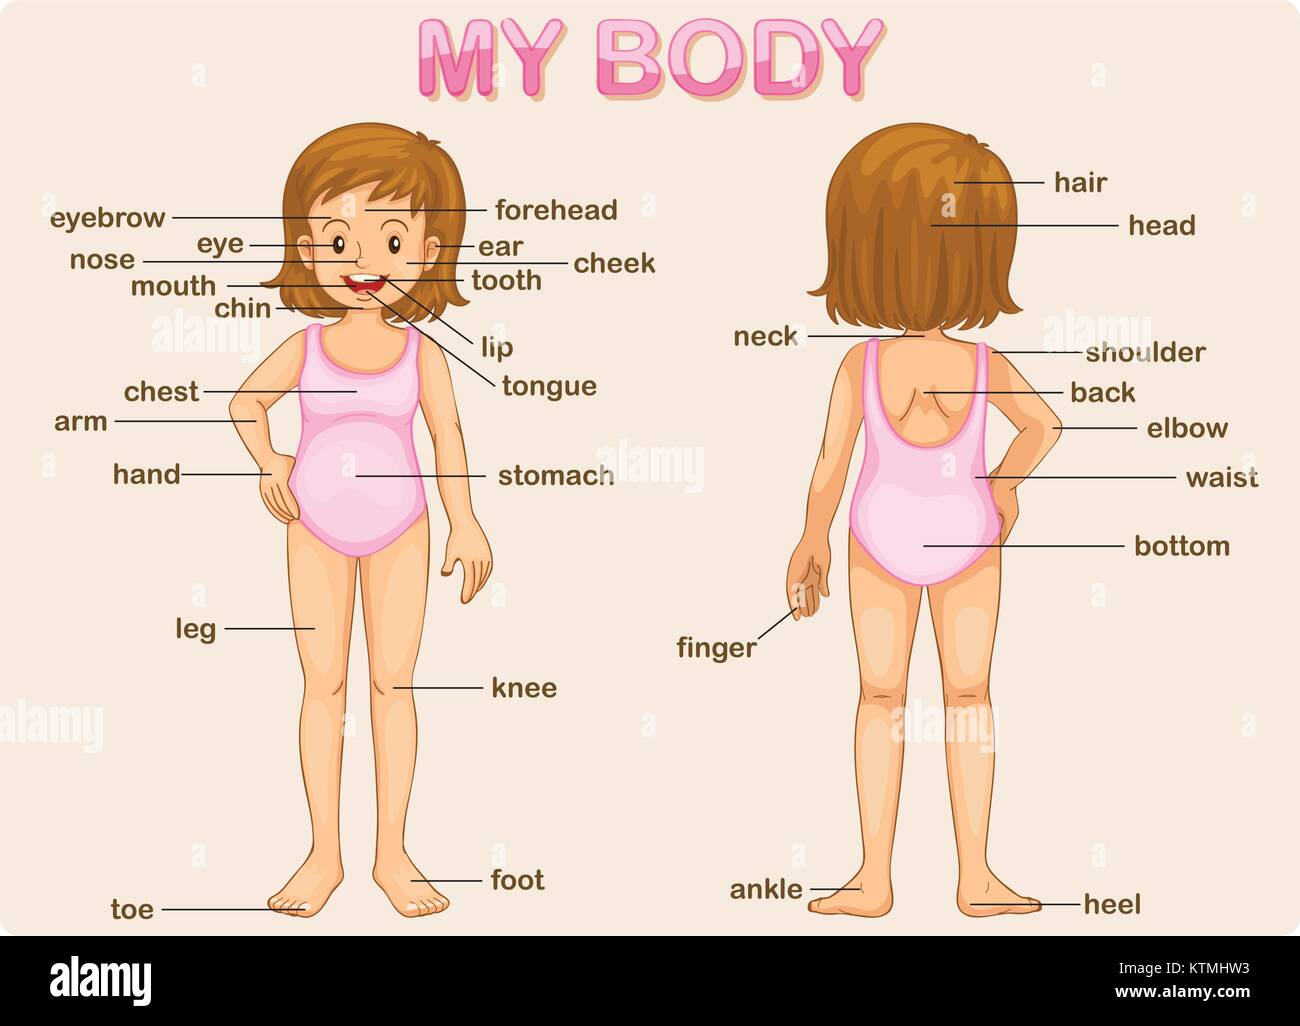 Illustration poster of the parts of the body Stock Vector